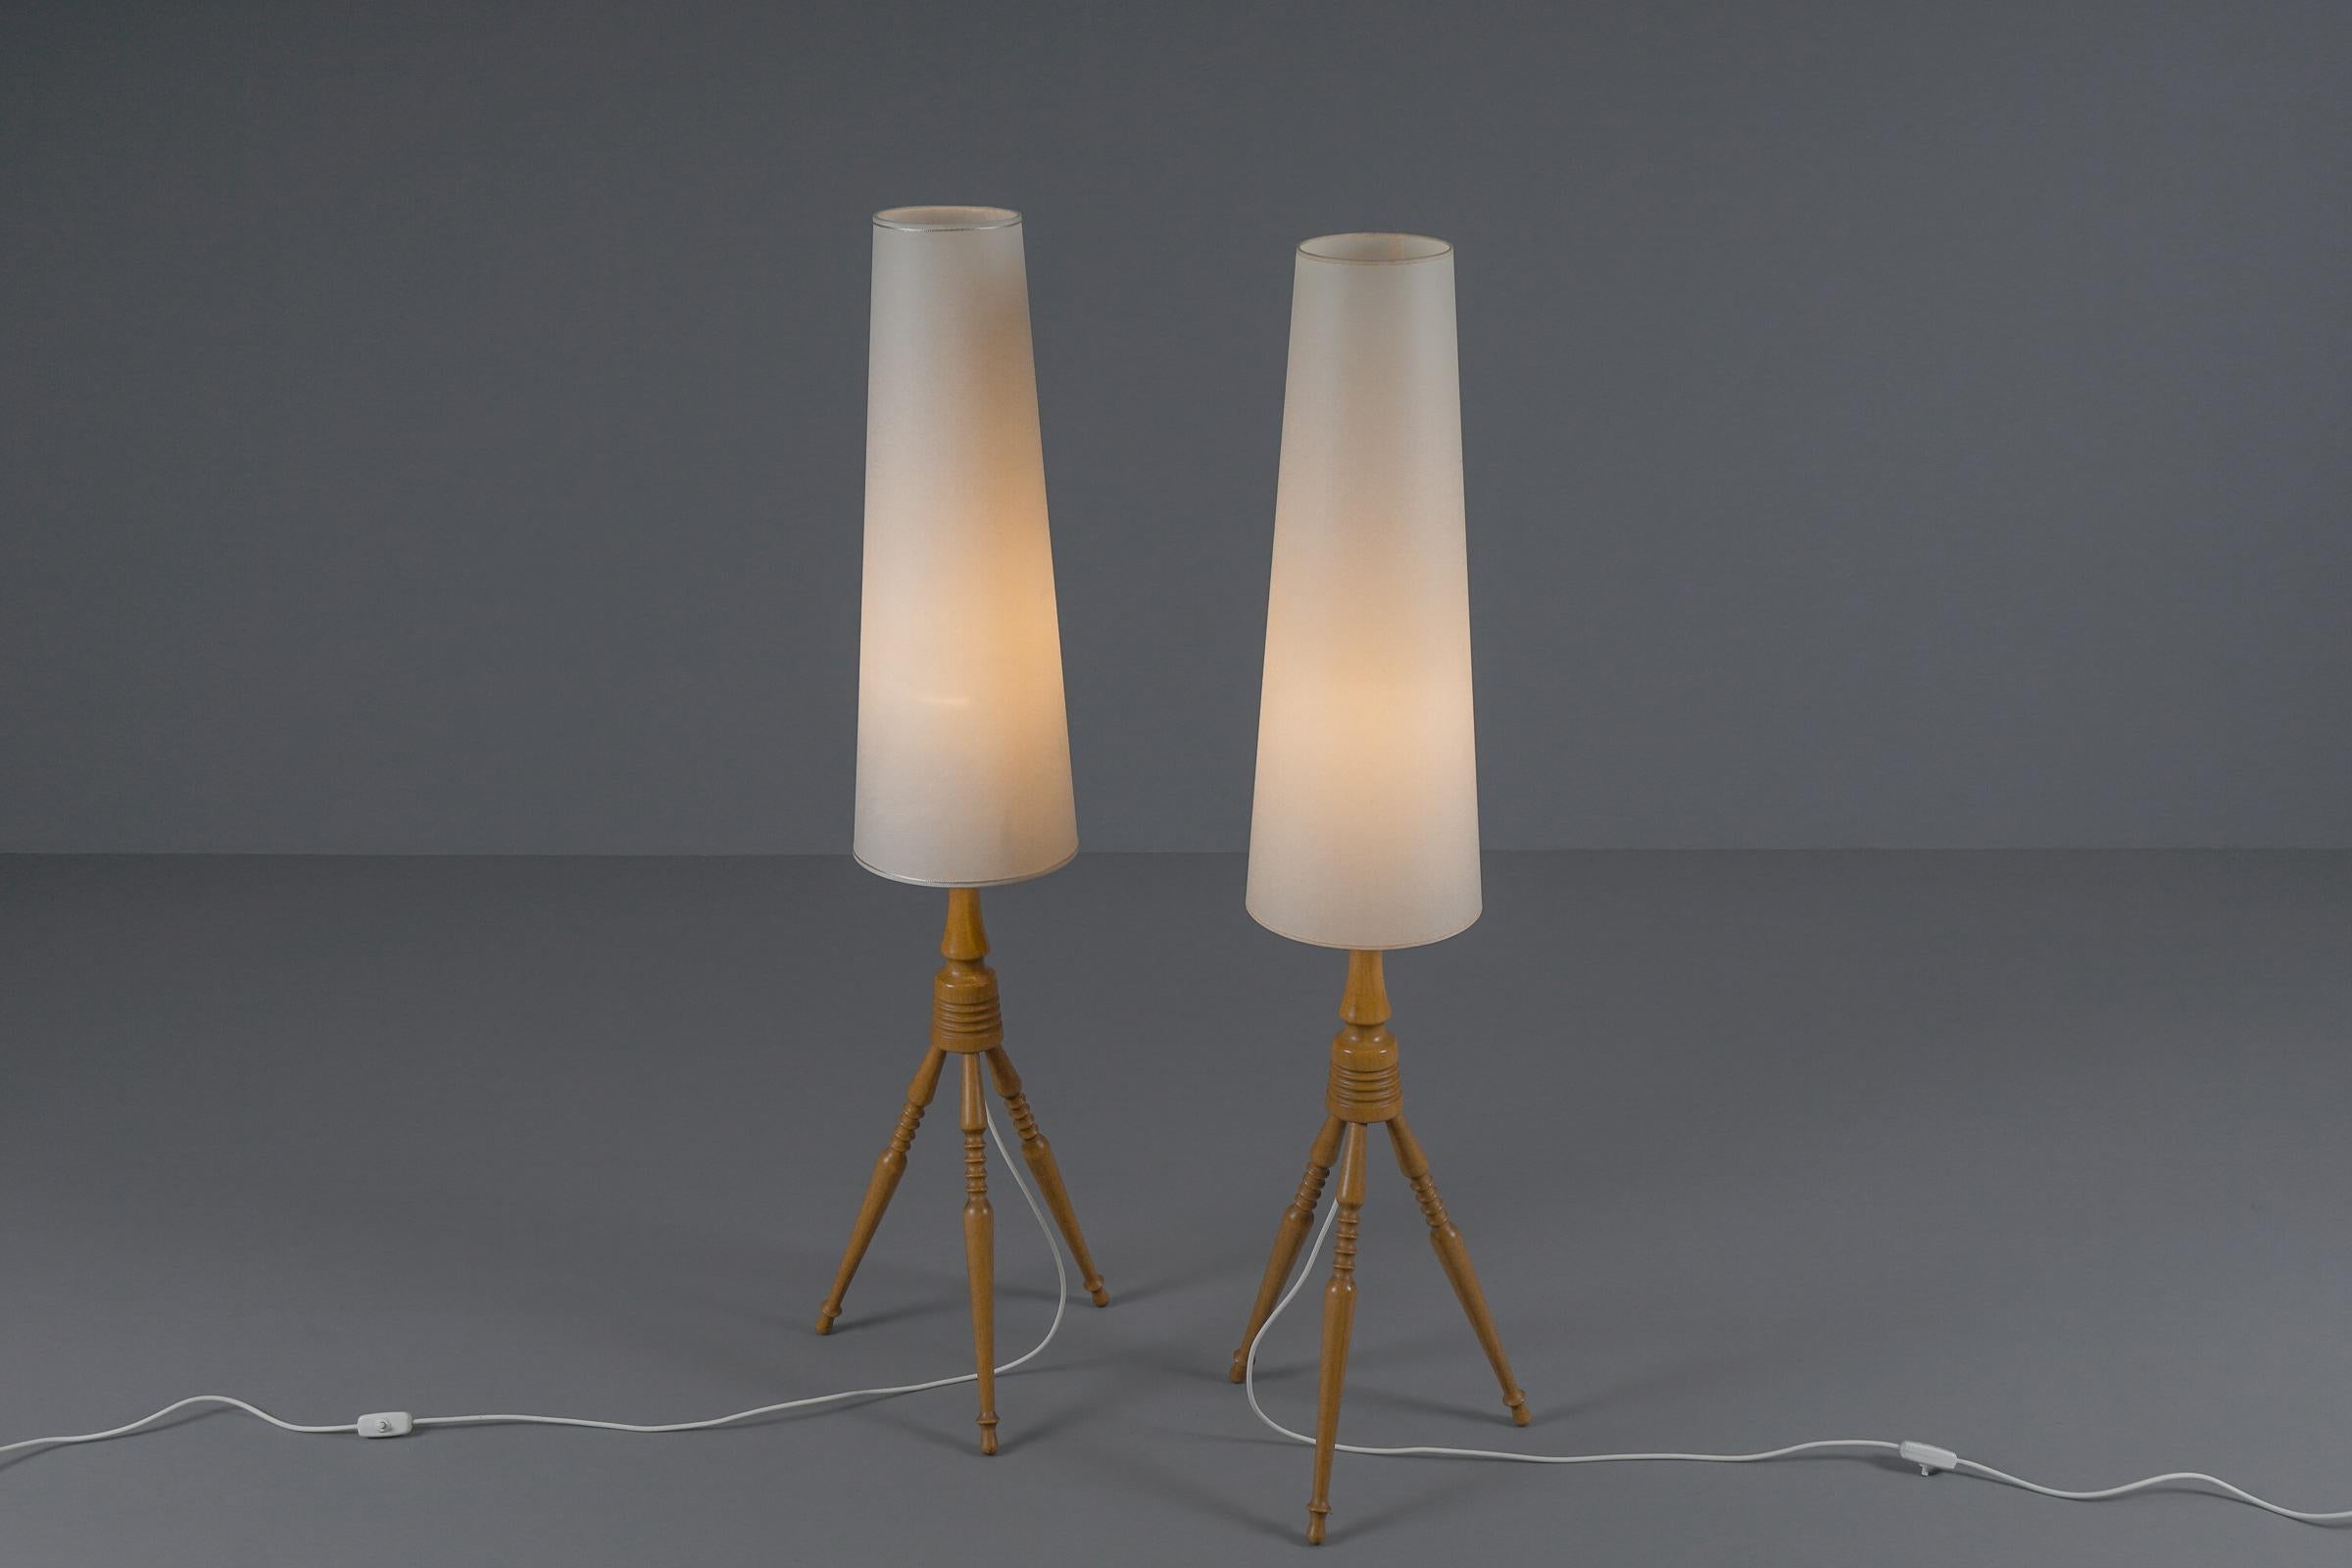 Lovely Pair Mid-Century Modern Floor Lamps in Wood, 1960s, France For Sale 1